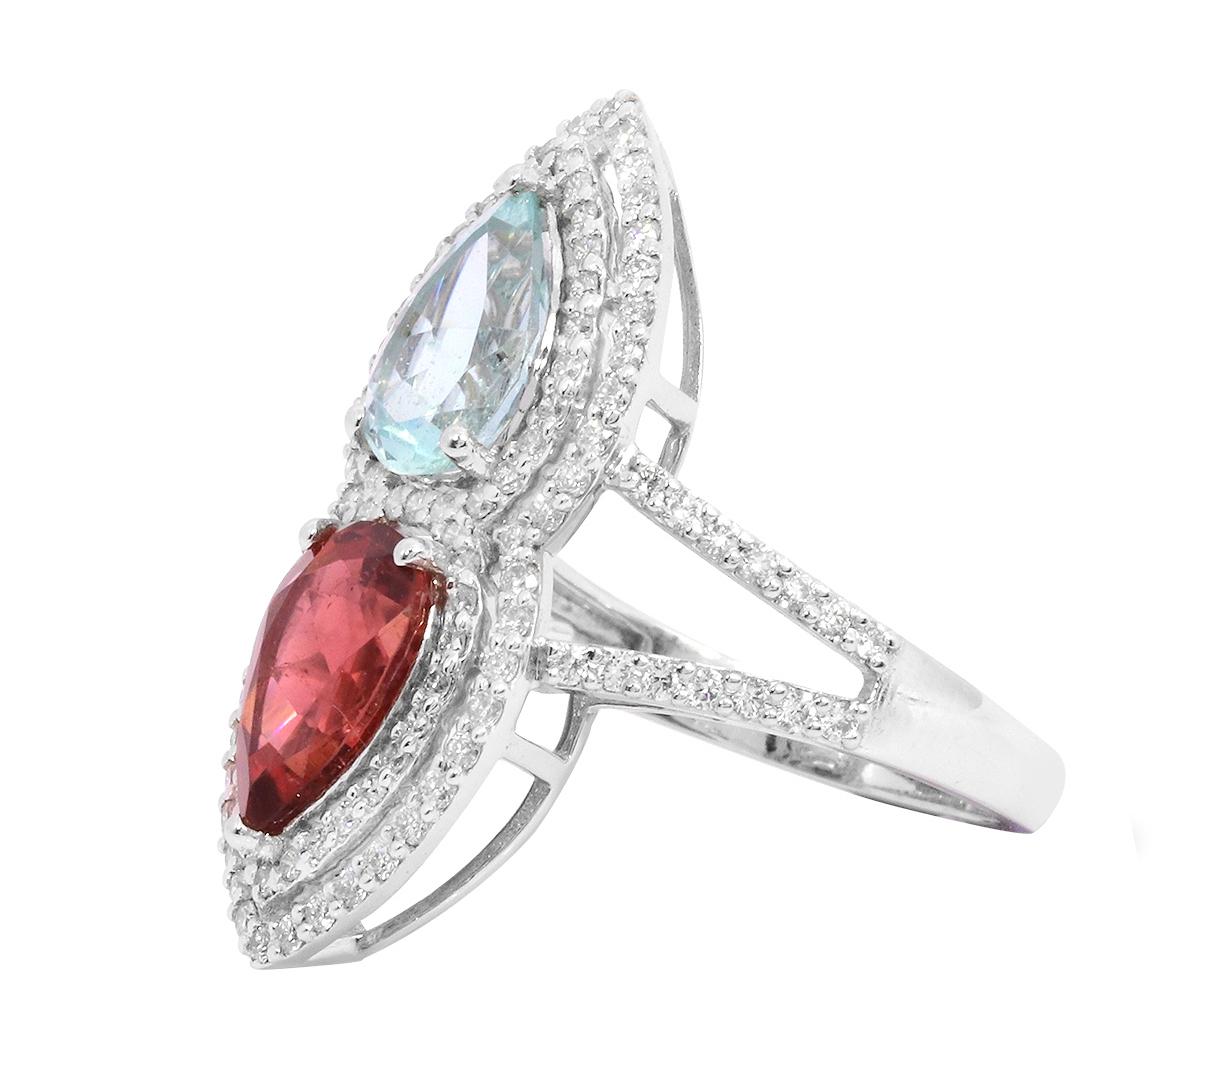 18 Karat White Gold 4.59 Carat Aquamarine, Tourmaline, and Diamond Fashion Ring

Have stardust at your fingertips with this captivating ring by Gems Paradise. Featuring Pear-Shape Aquamarine and a Pear-Shaped Tourmaline set in a 3 prong setting and